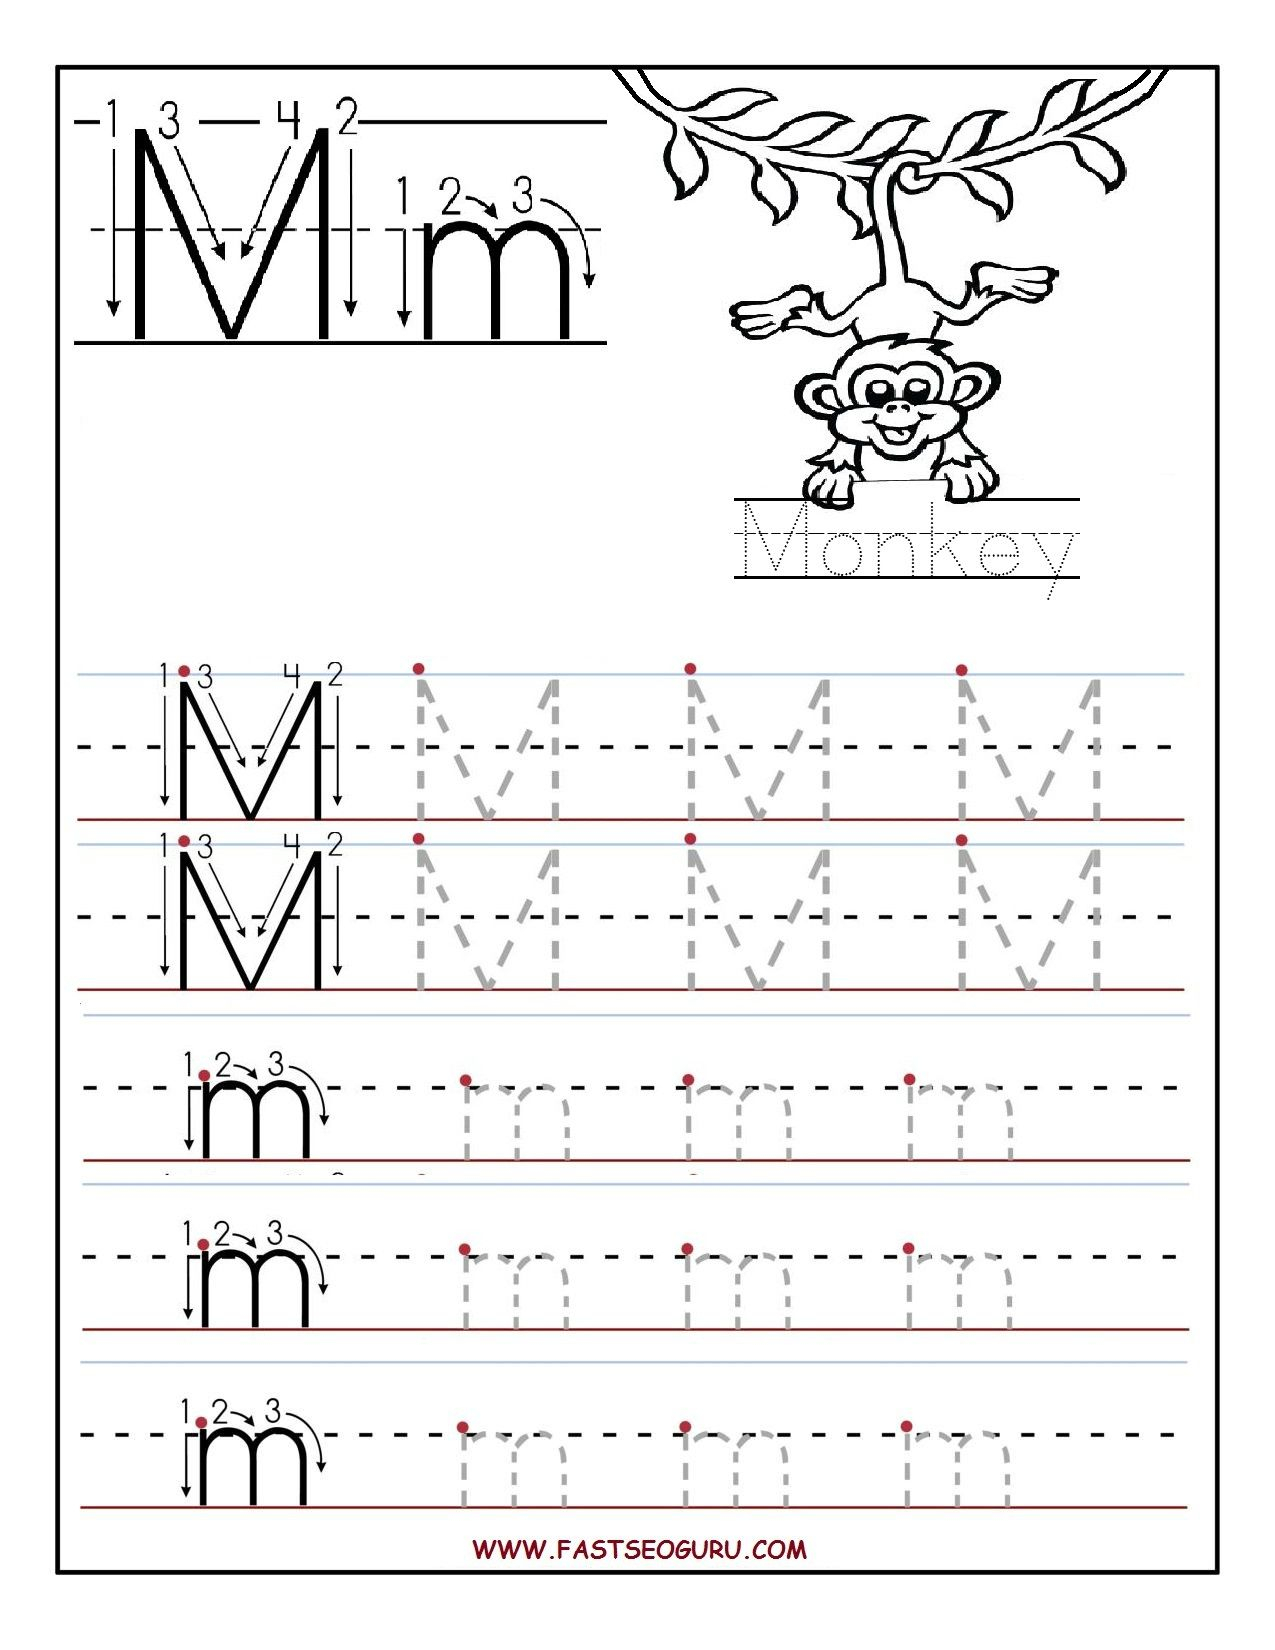 Printable Letter M Tracing Worksheets For Preschool throughout Letter M Worksheets Tracing